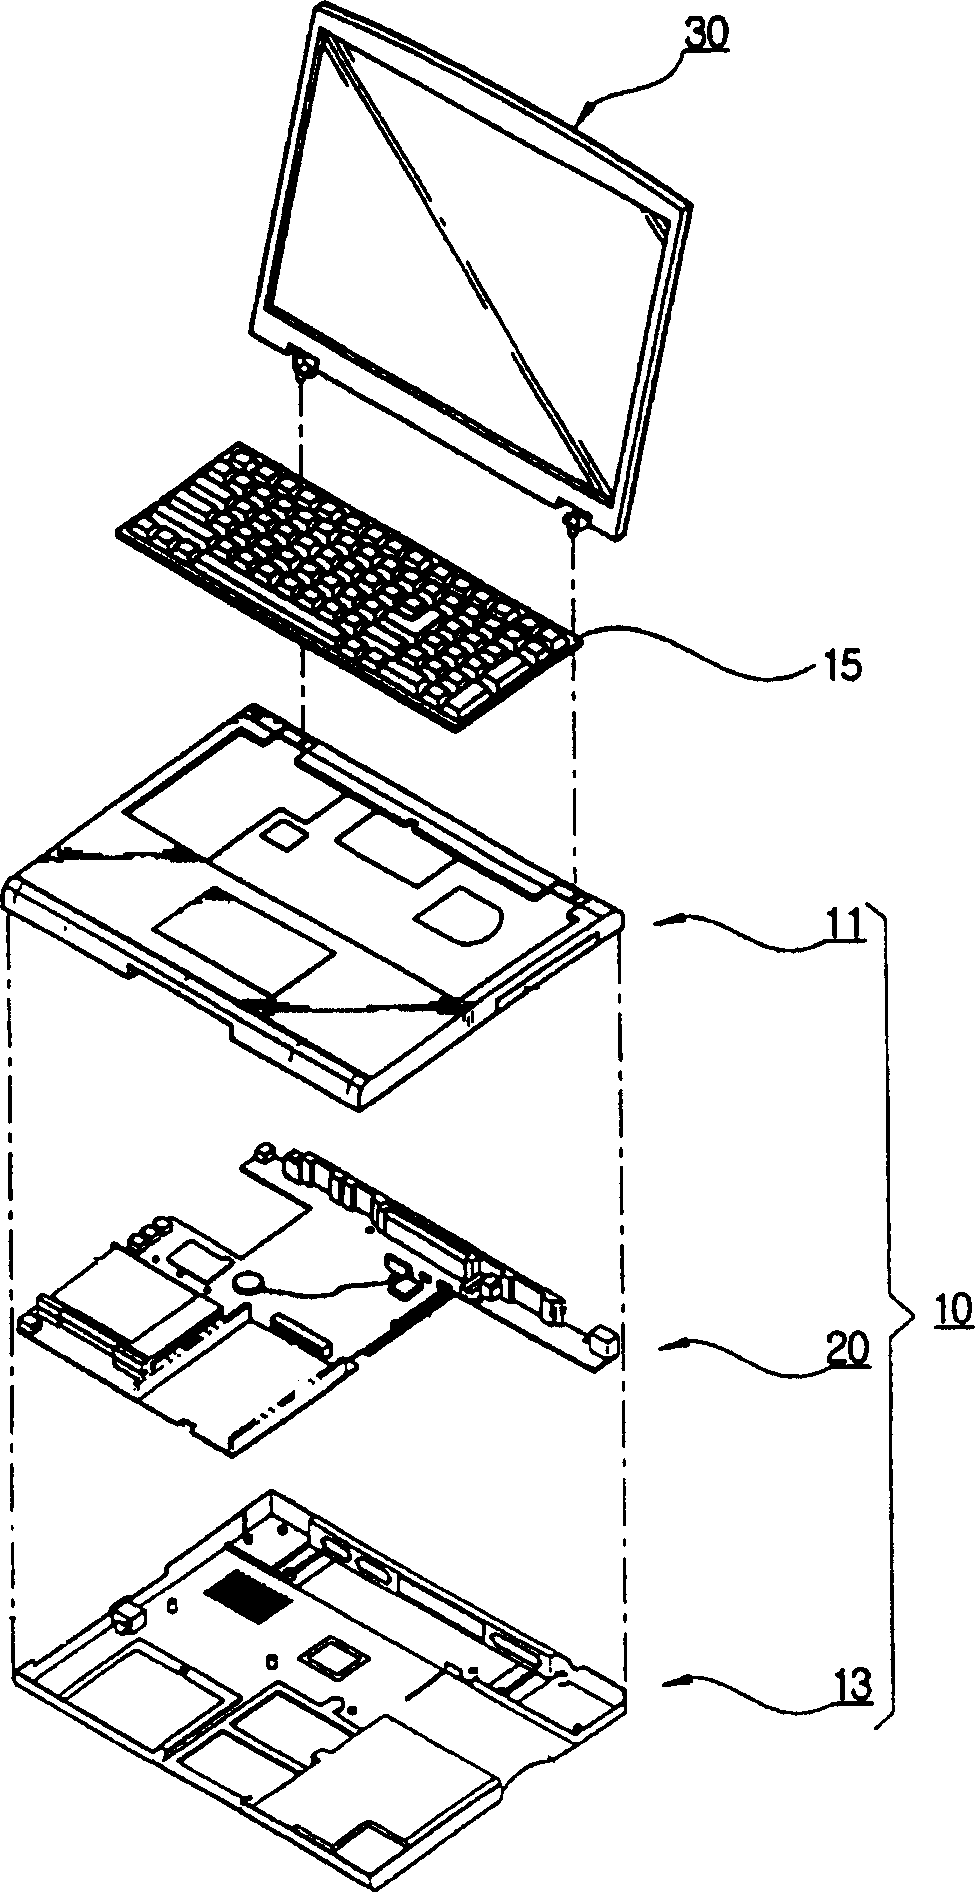 Notebook computer with anti-theft alarm